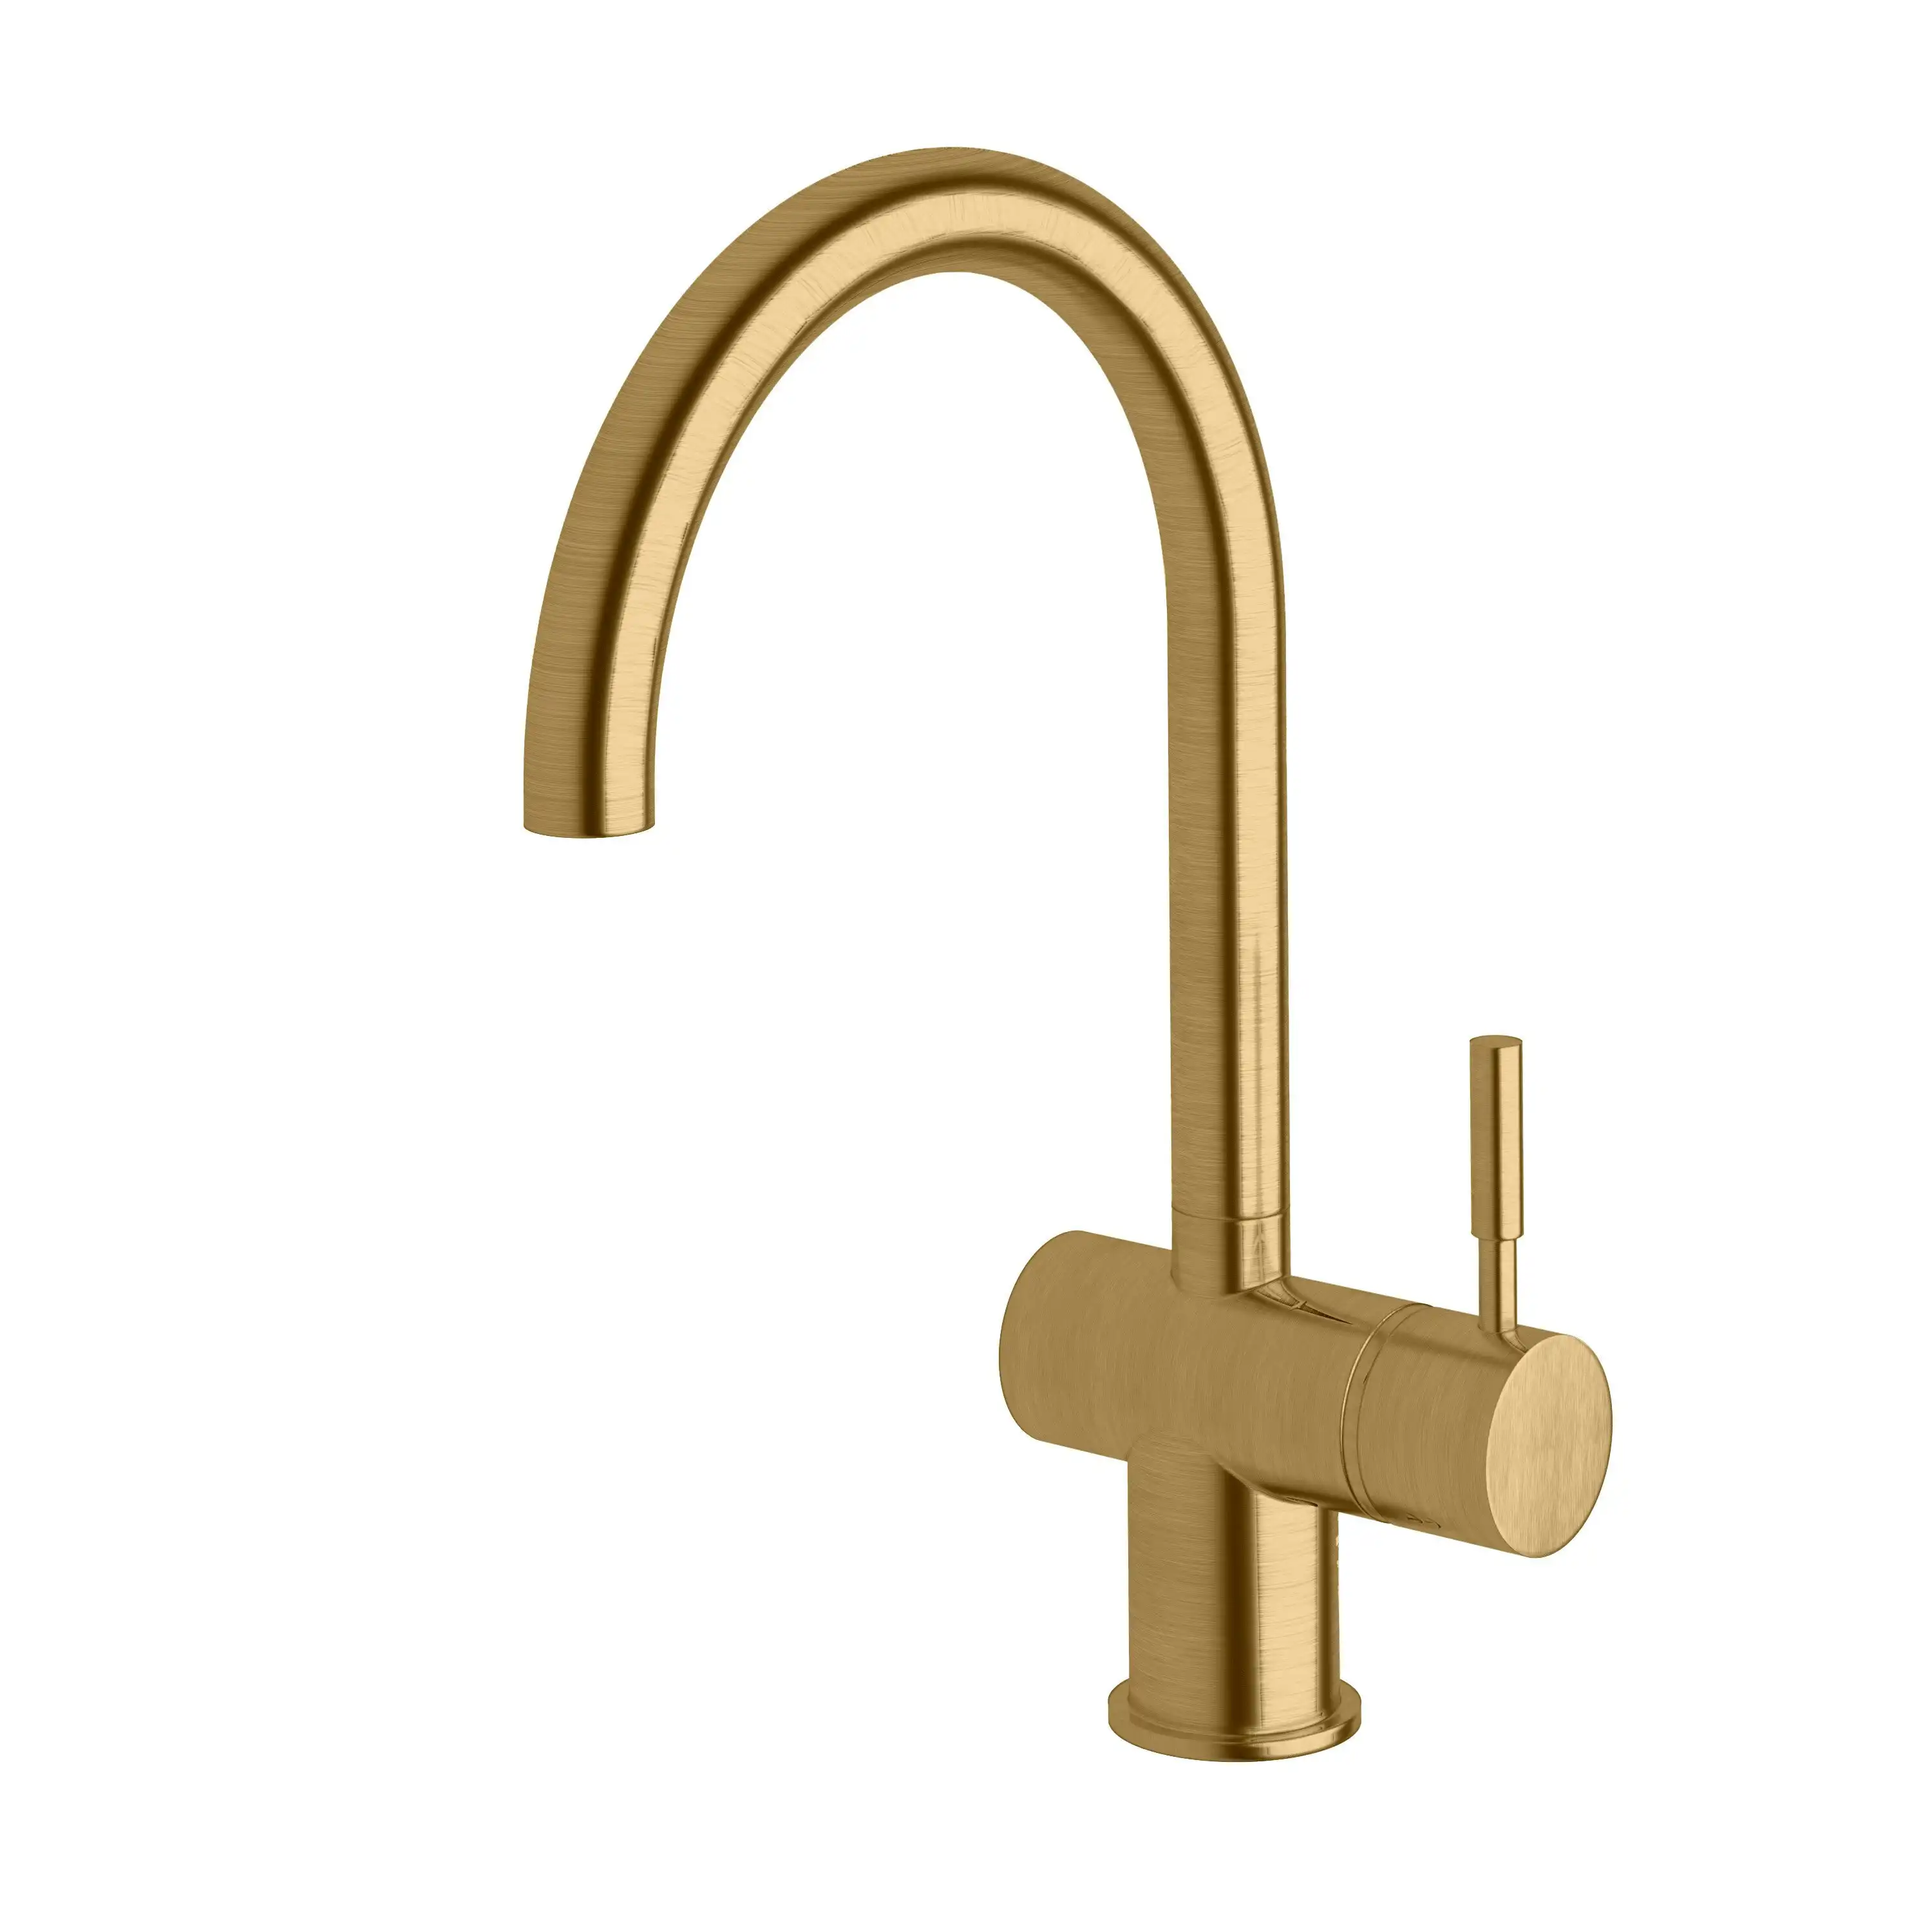 Sussex Taps Voda Curved Sink Mixer Tap - Brushed Gold